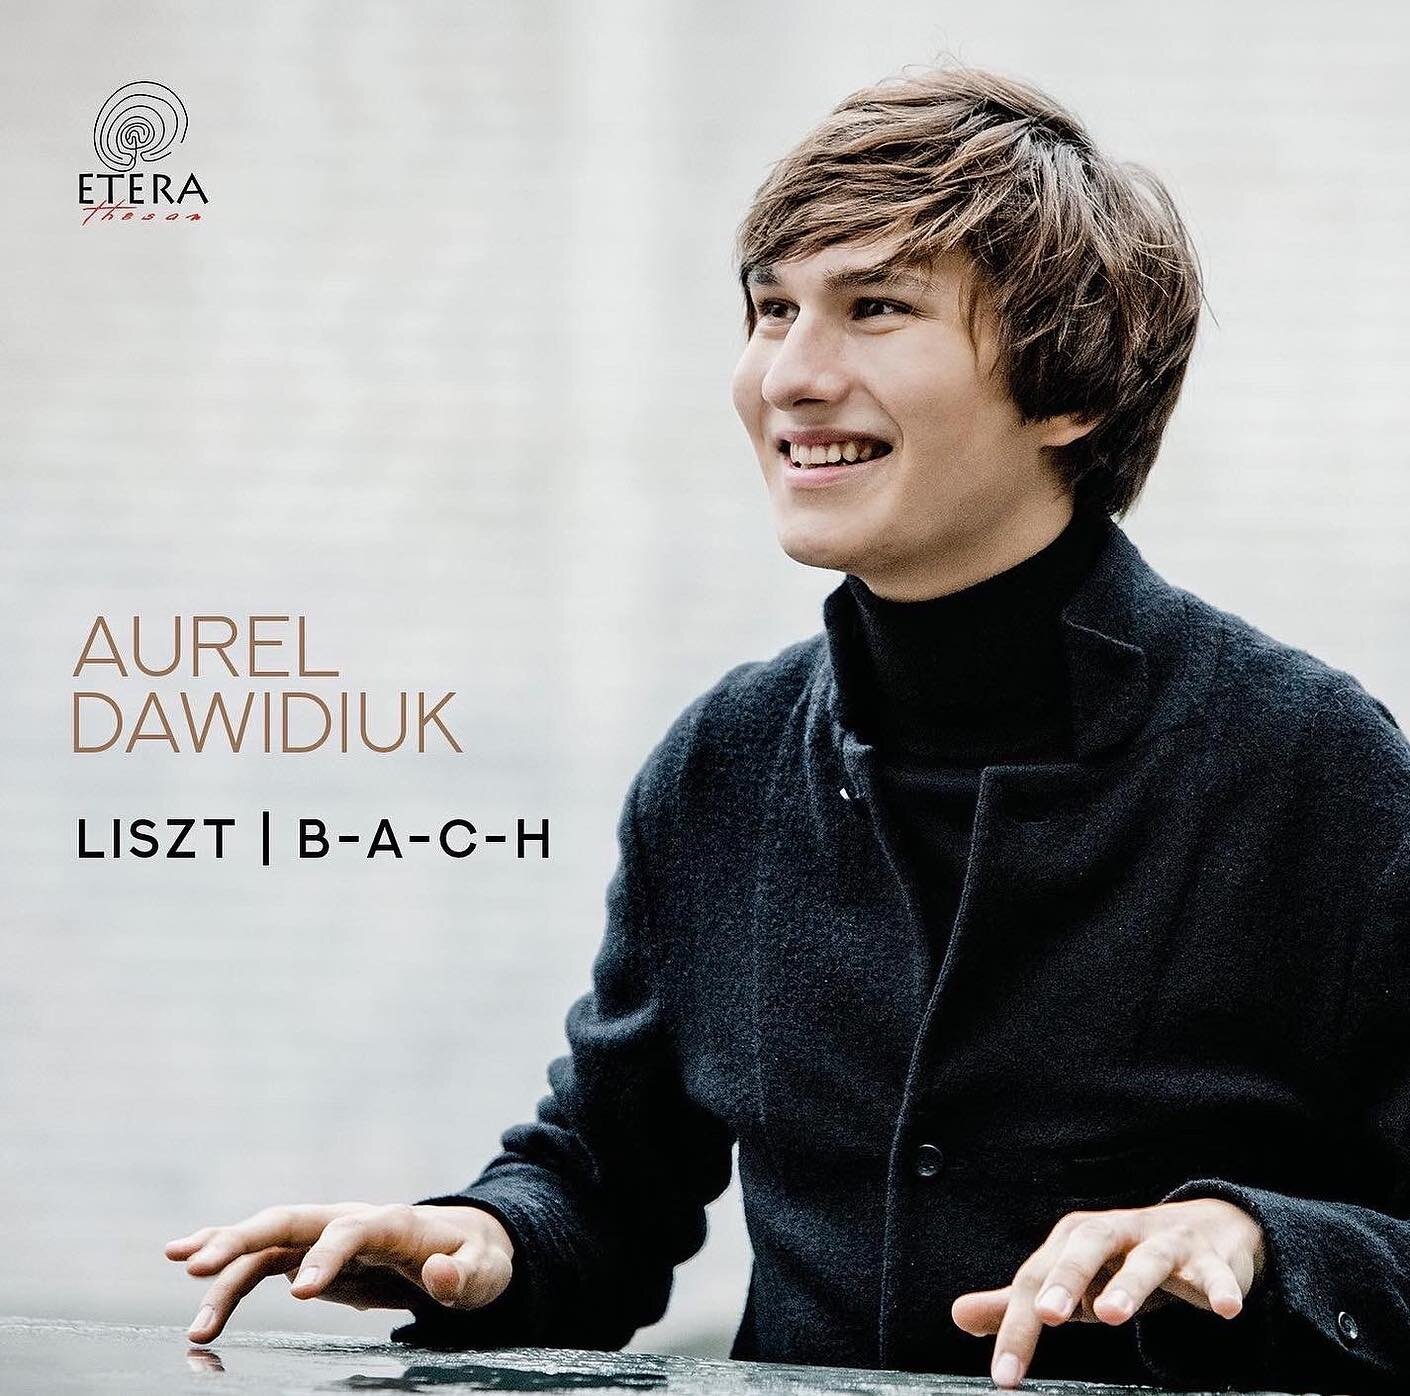 Out Now: Aurel Dawidiuk&rsquo;s debut CD LISZT | B-A-C-H is available for purchase and on all major streaming services!

#aureldawidiuk #etera #thesan #piano #liszt #bach #debut #classicalmusic